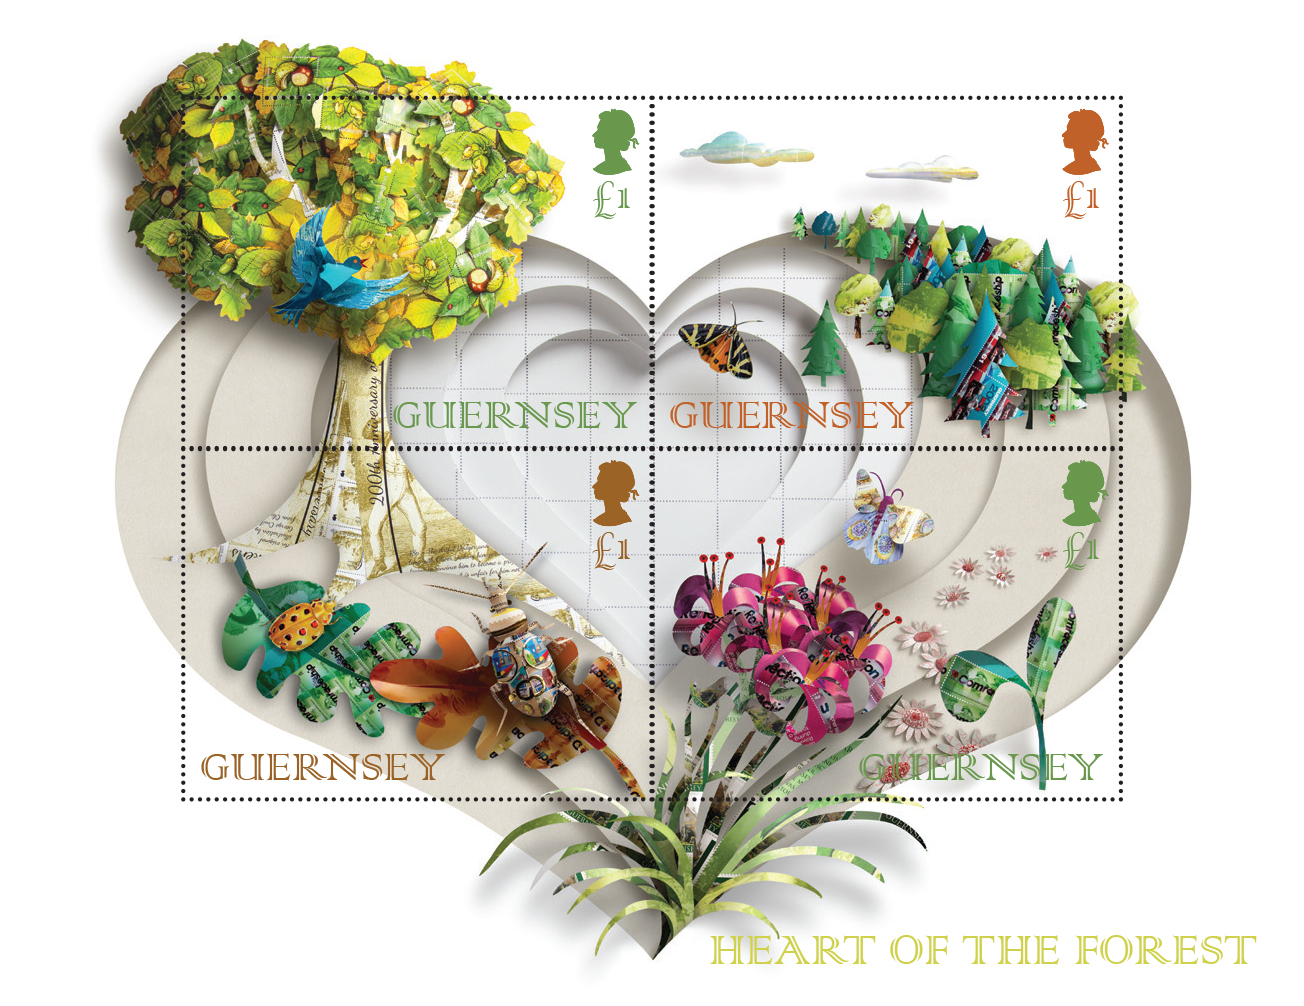 Guernsey Post to release final stamp from 'Heart of the forest' series